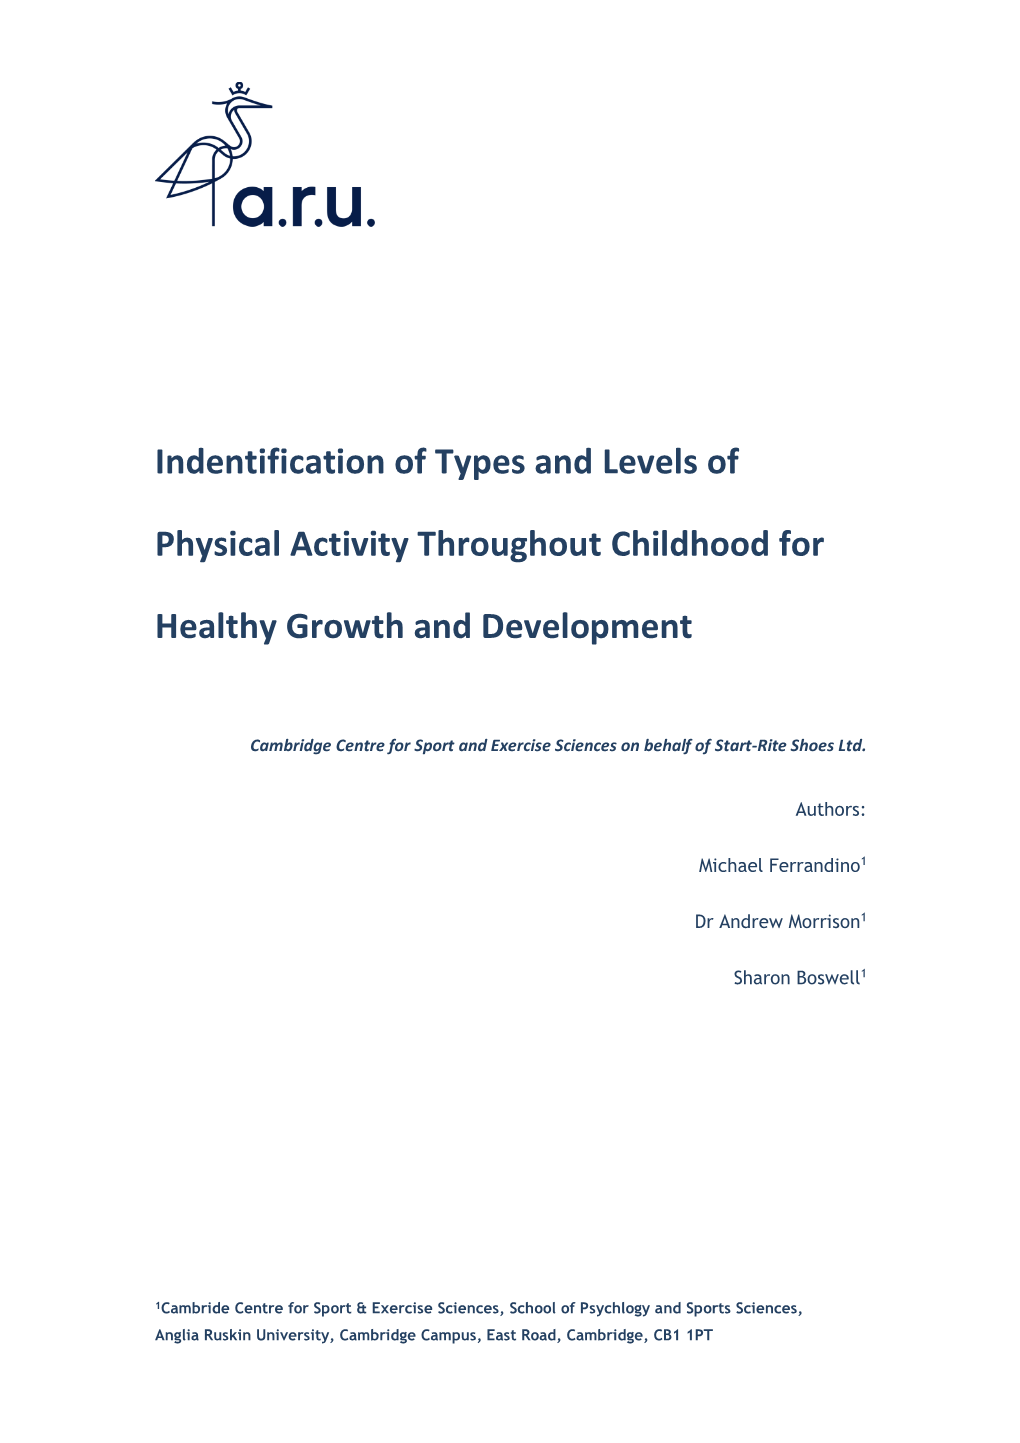 Indentification of Types and Levels of Physical Activity Throughout Childhood for Healthy Growth and Development